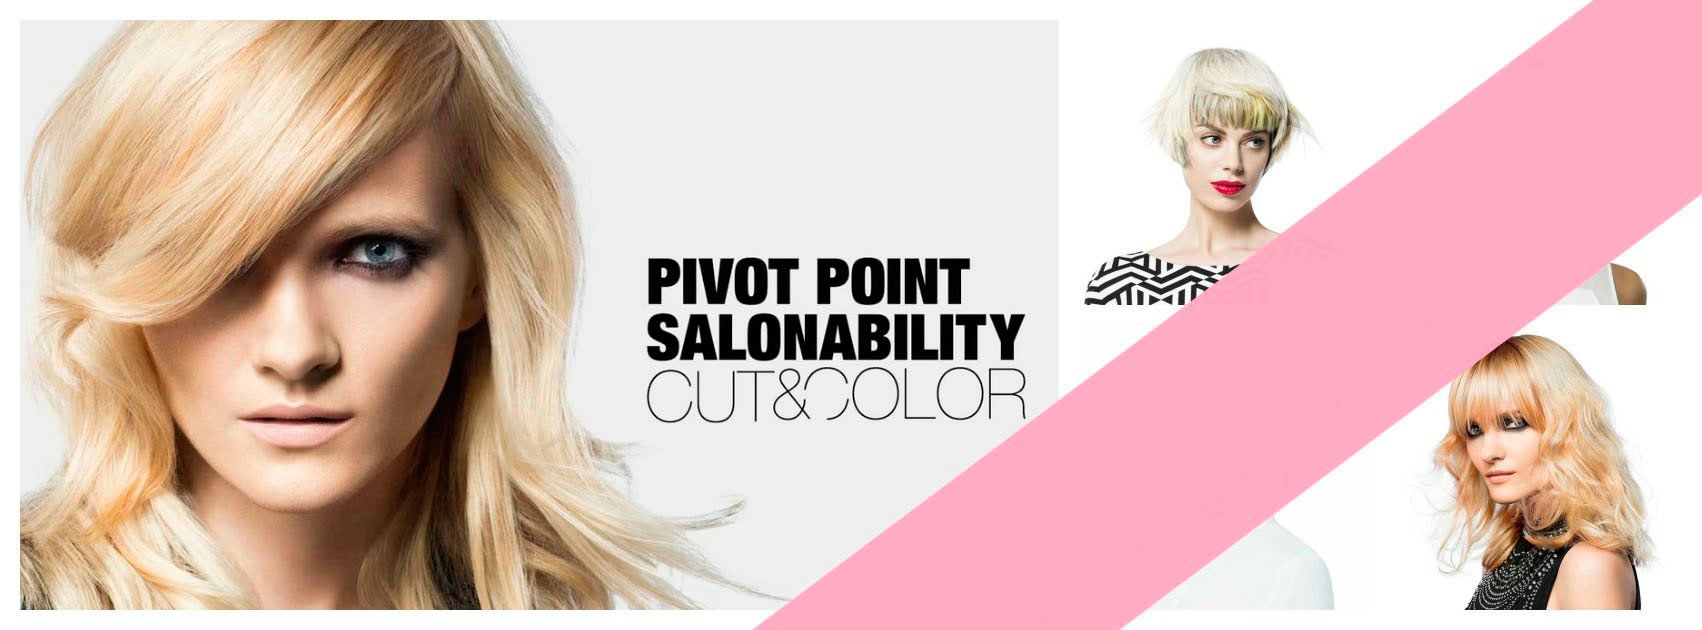 Academia Pivot Point cut and color